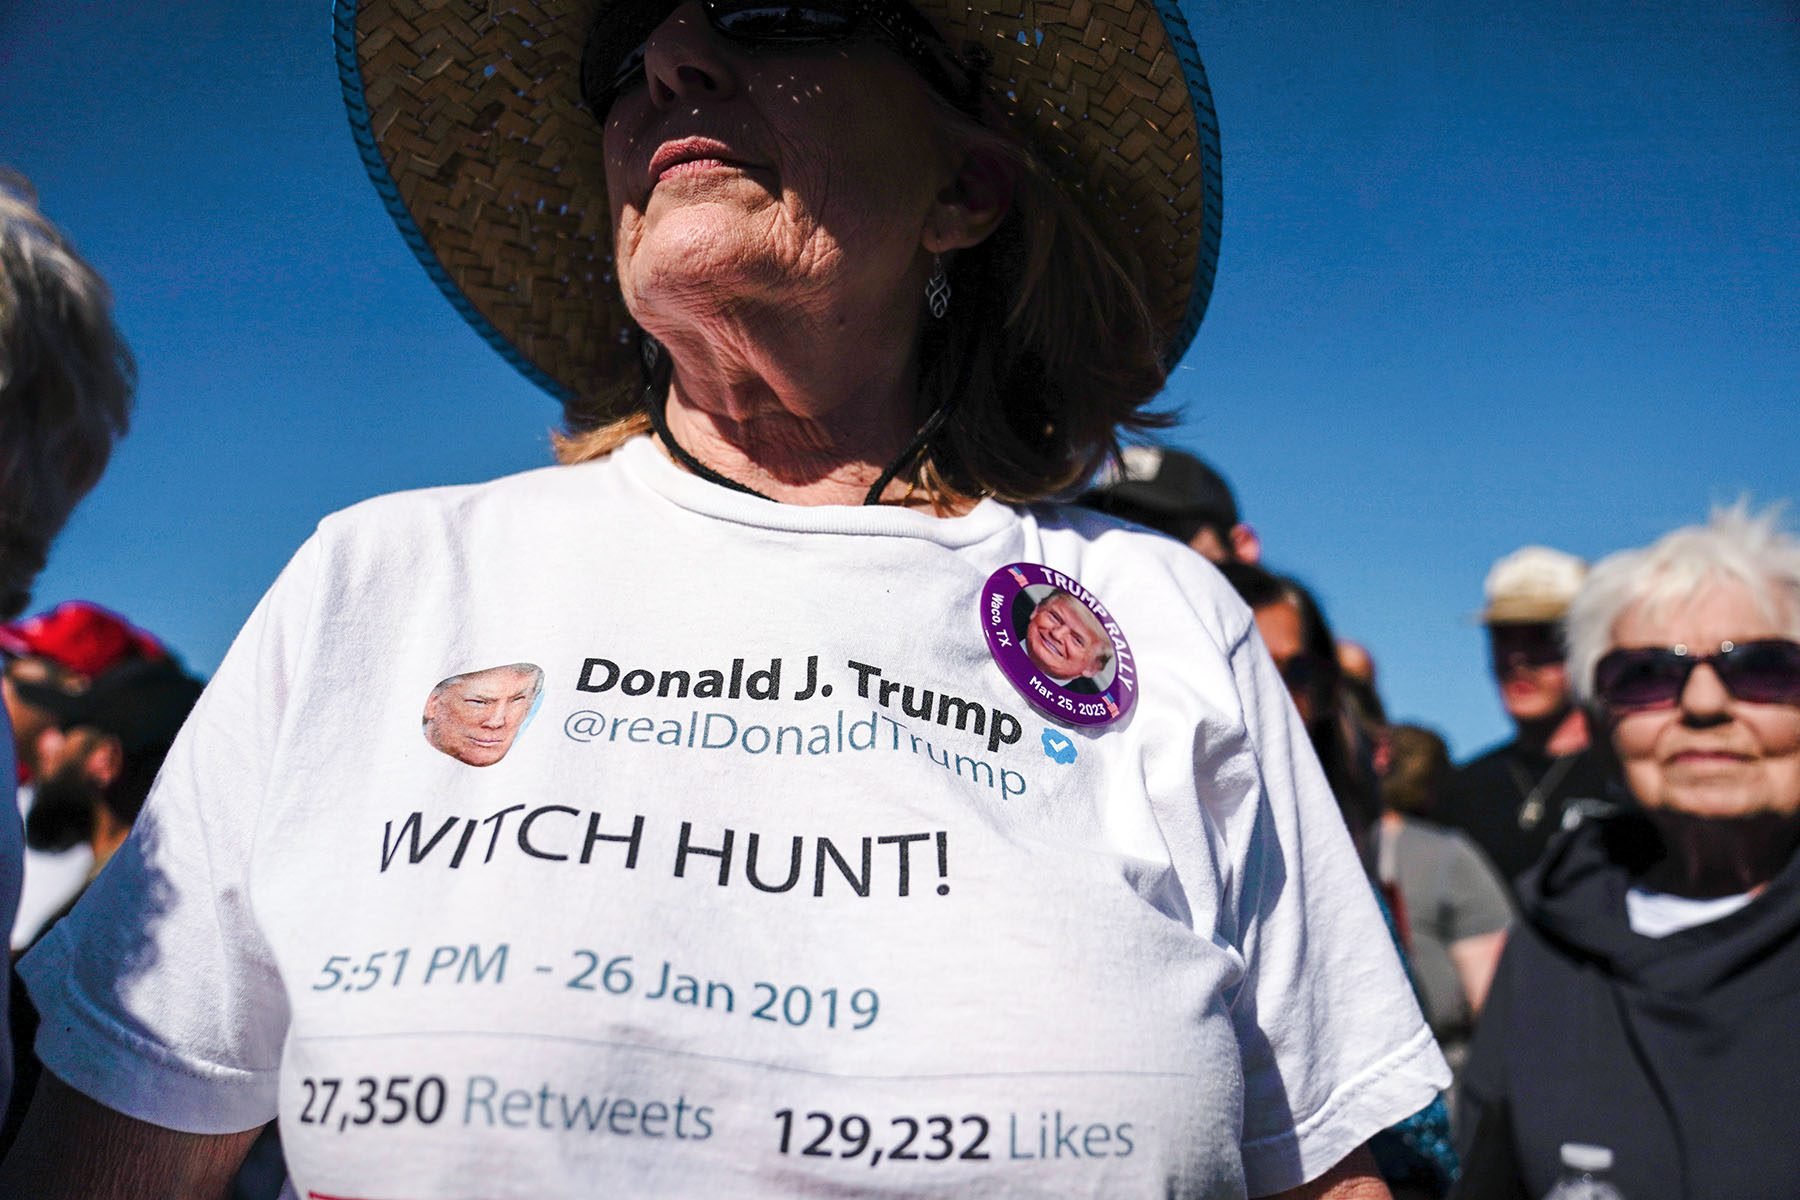 A supporter wearing a shirt with a screenshot of Donald Trump's tweet that reads "WITCH HUNT!" as she waits for him to take the stage at a campaign rally in Waco, Texas.